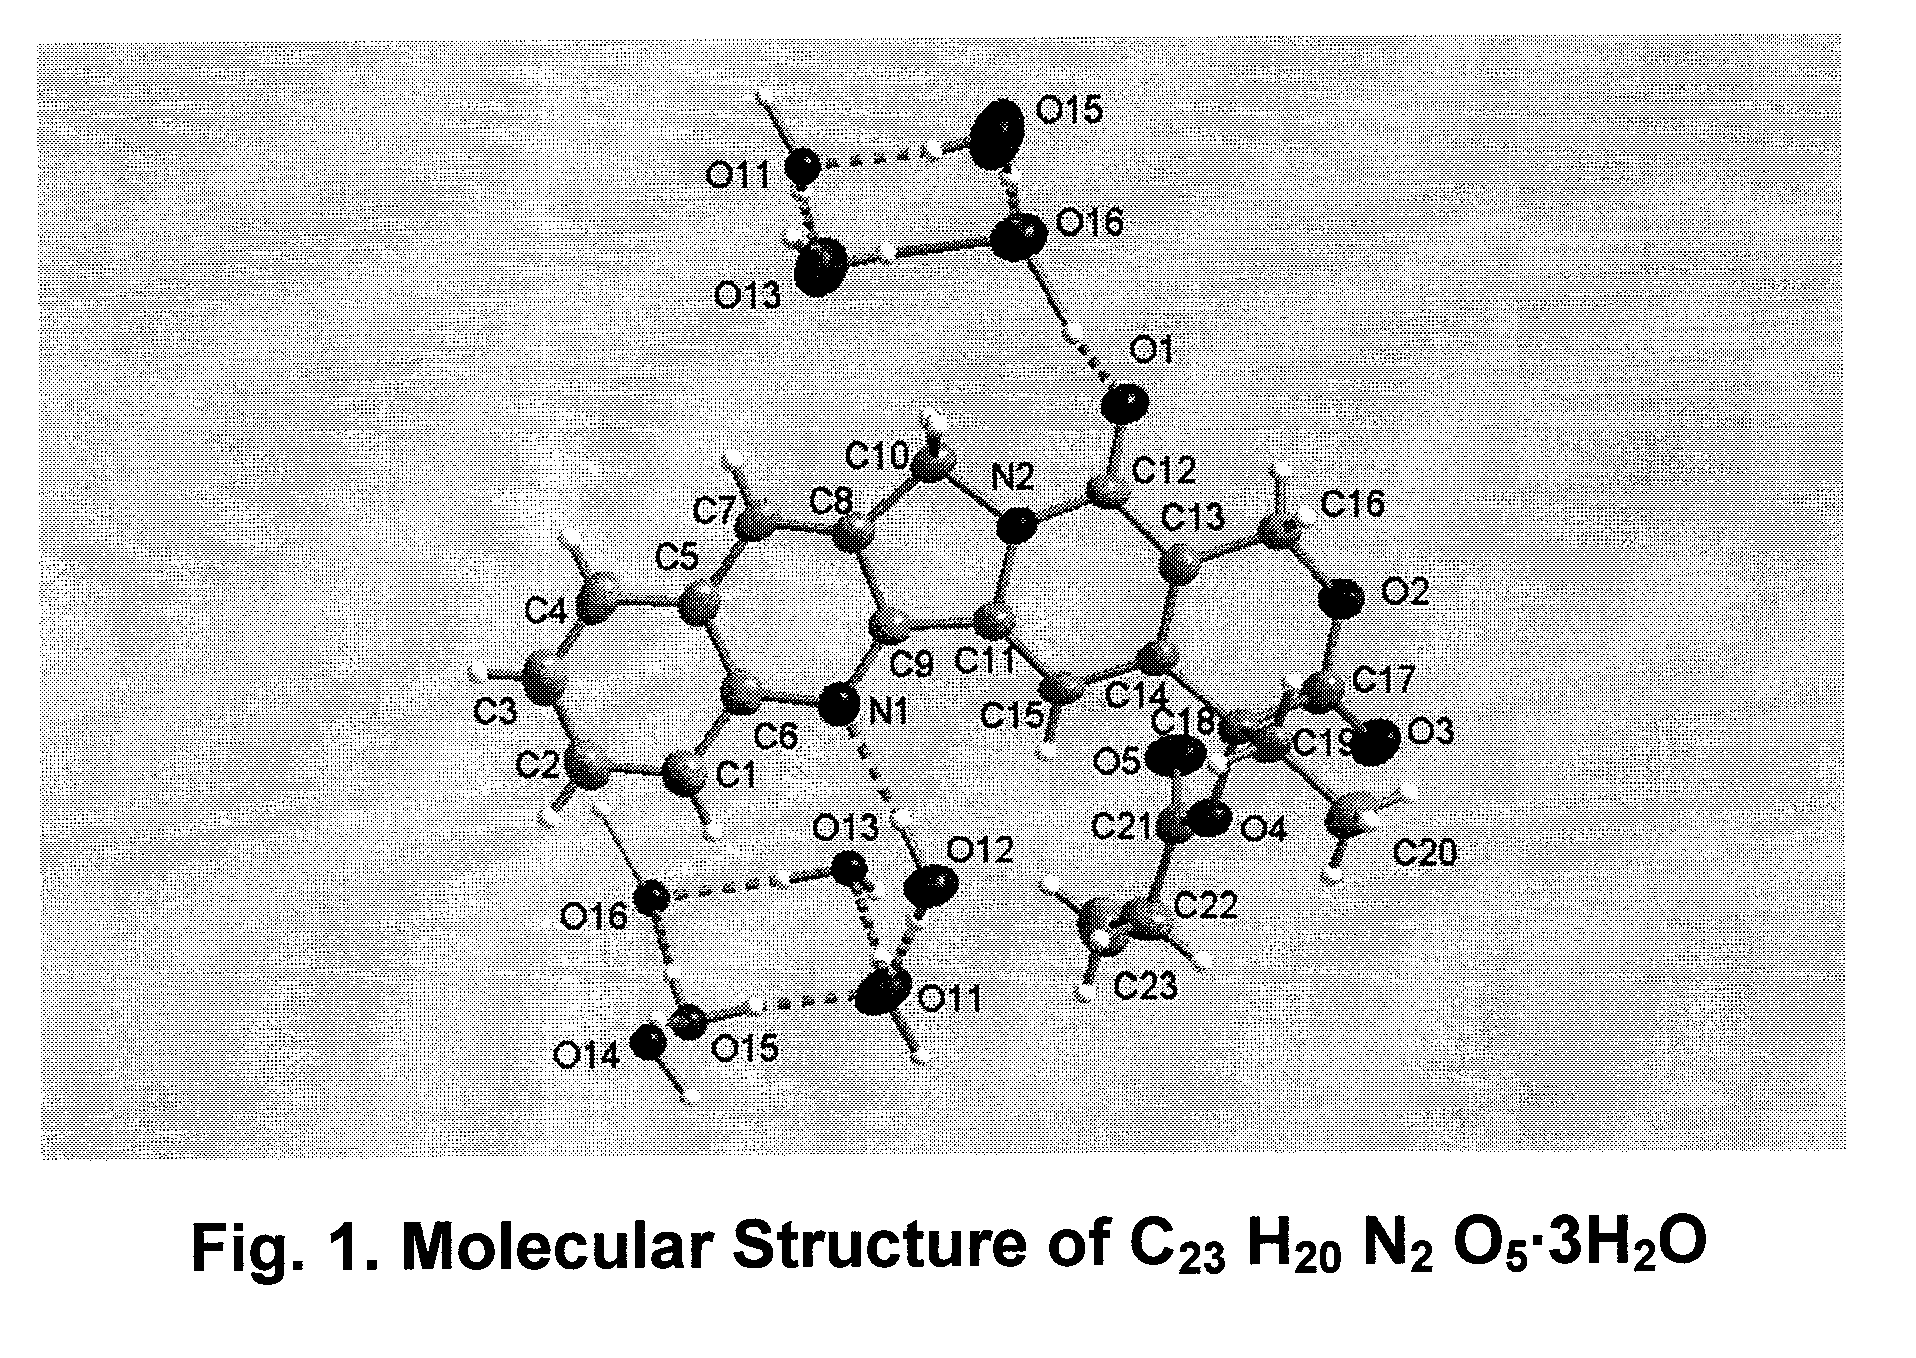 Hydrated crystalline esters of camptothecin